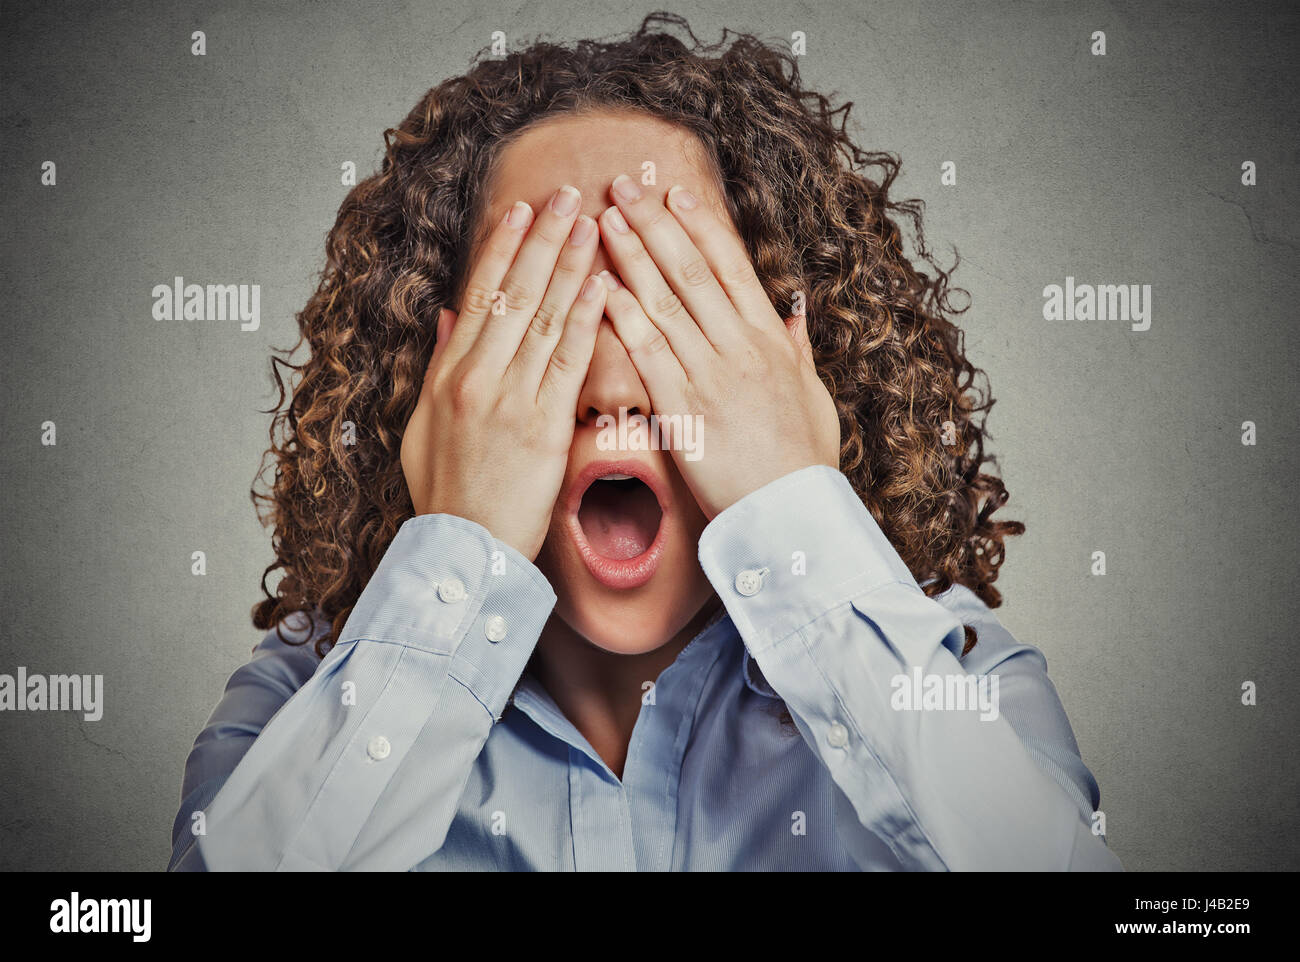 Headshot young scared woman covering eyes wide open mouth isolated on grey wall background. Human emotions face expressions feelings reaction percepti Stock Photo